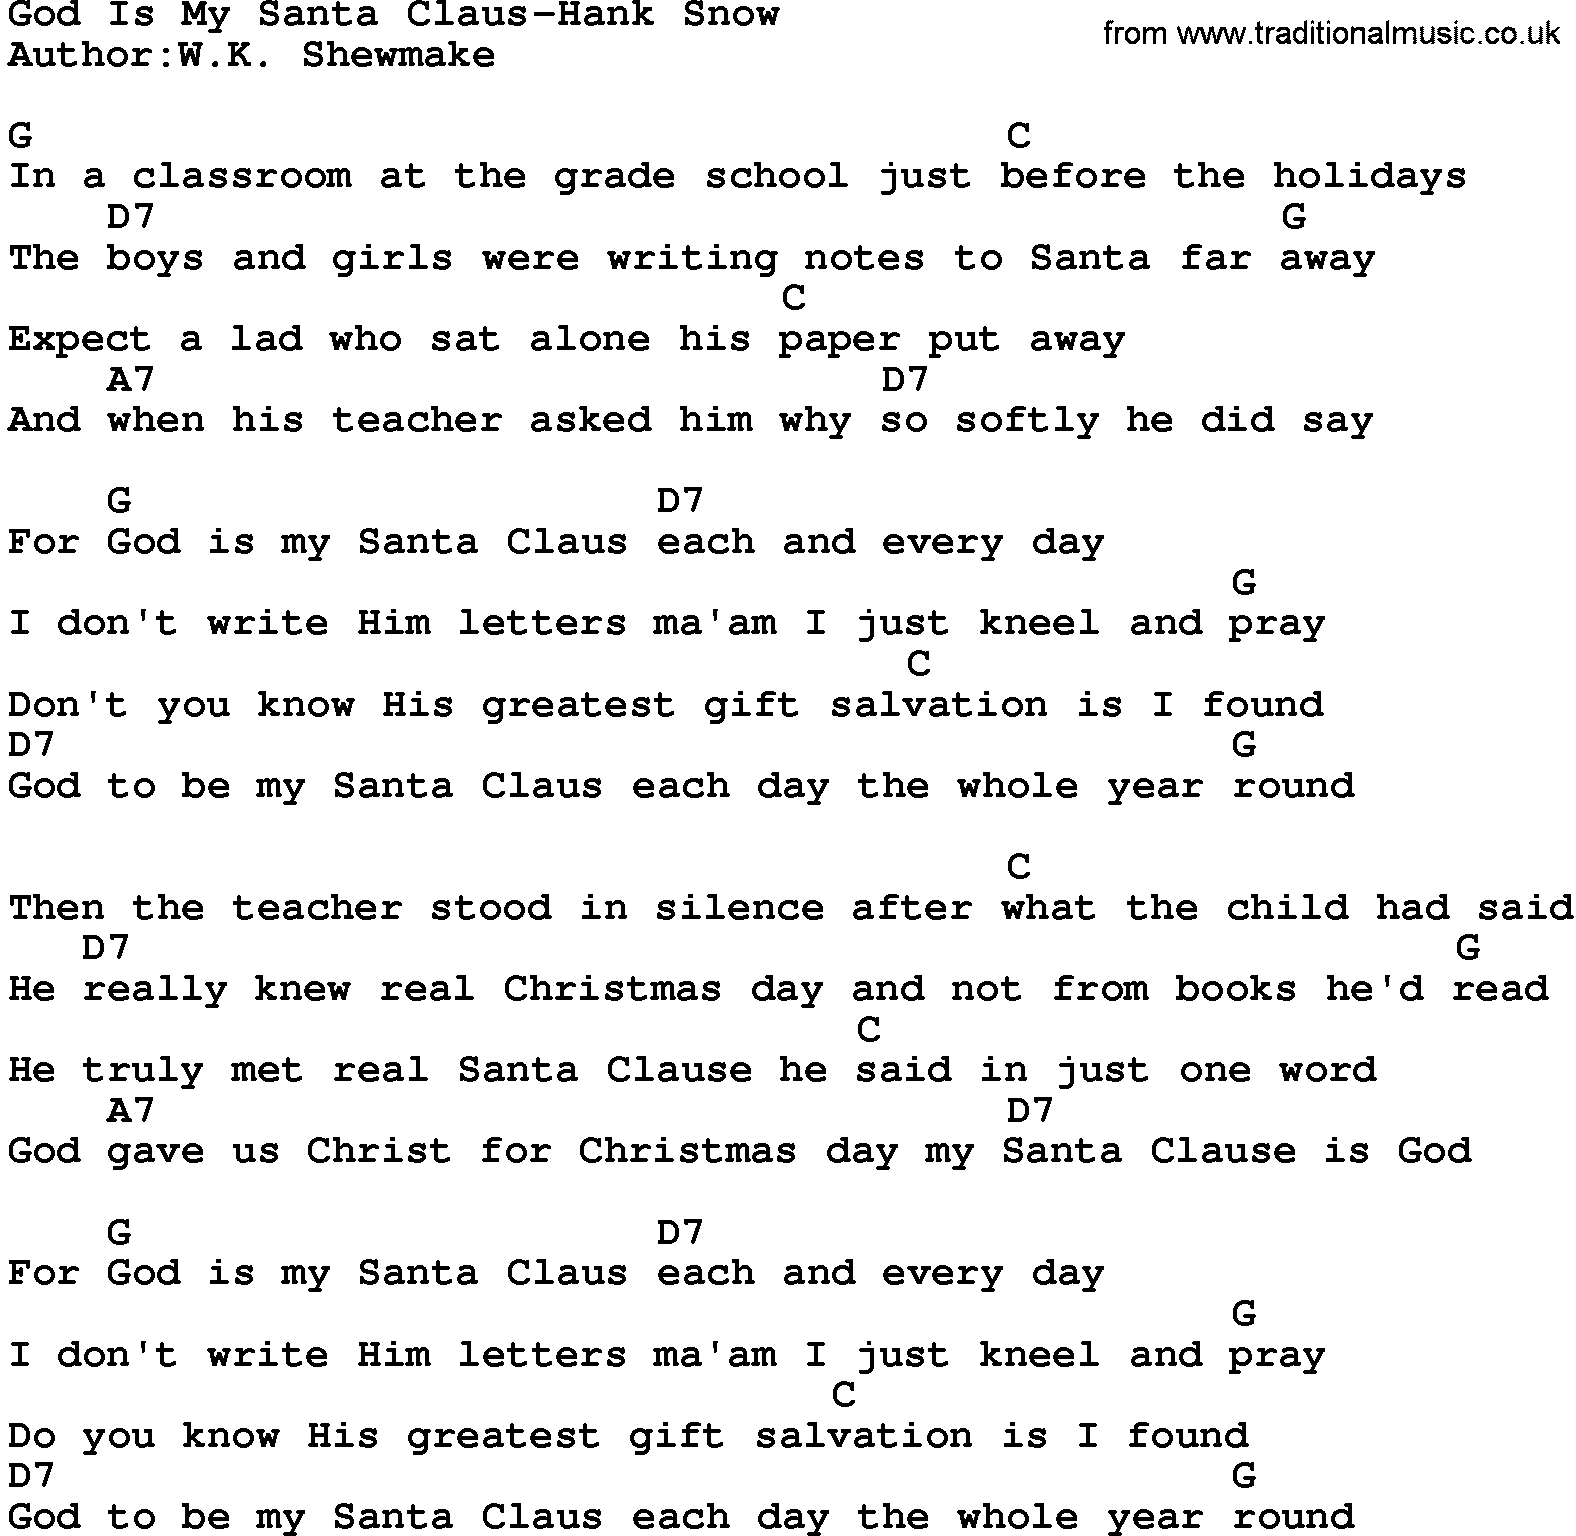 Country music song: God Is My Santa Claus-Hank Snow lyrics and chords